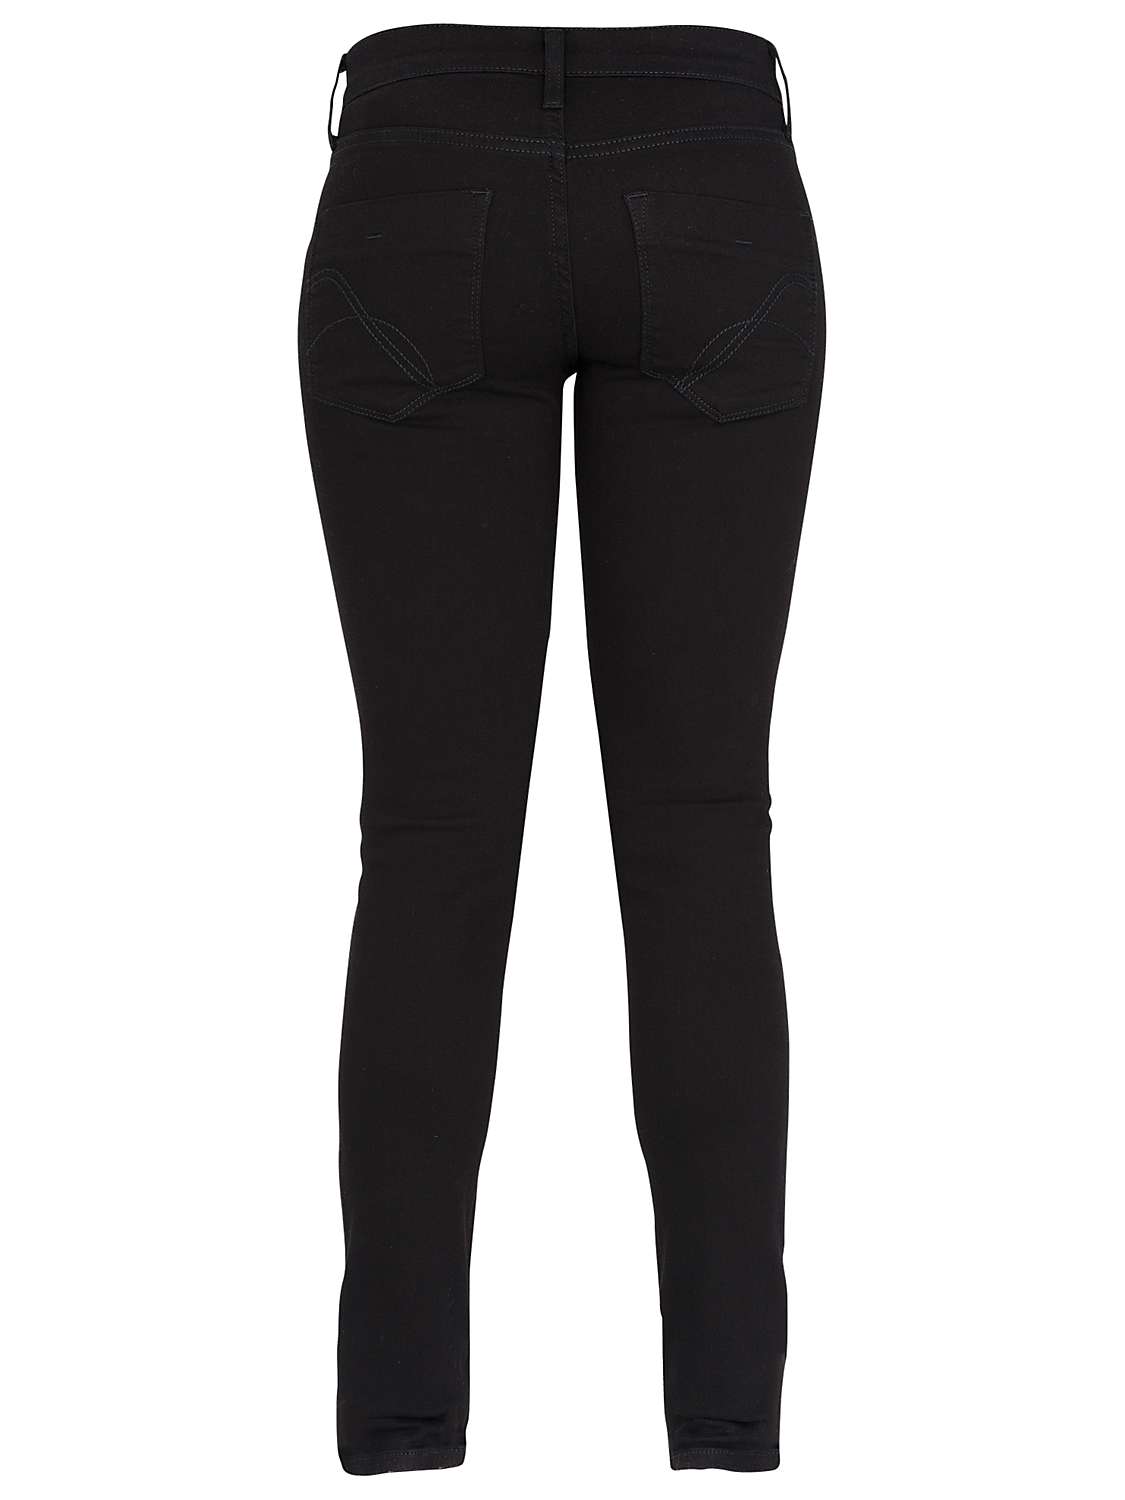 French Connection Skinny Stretch Denim Jeans, Black at John Lewis ...